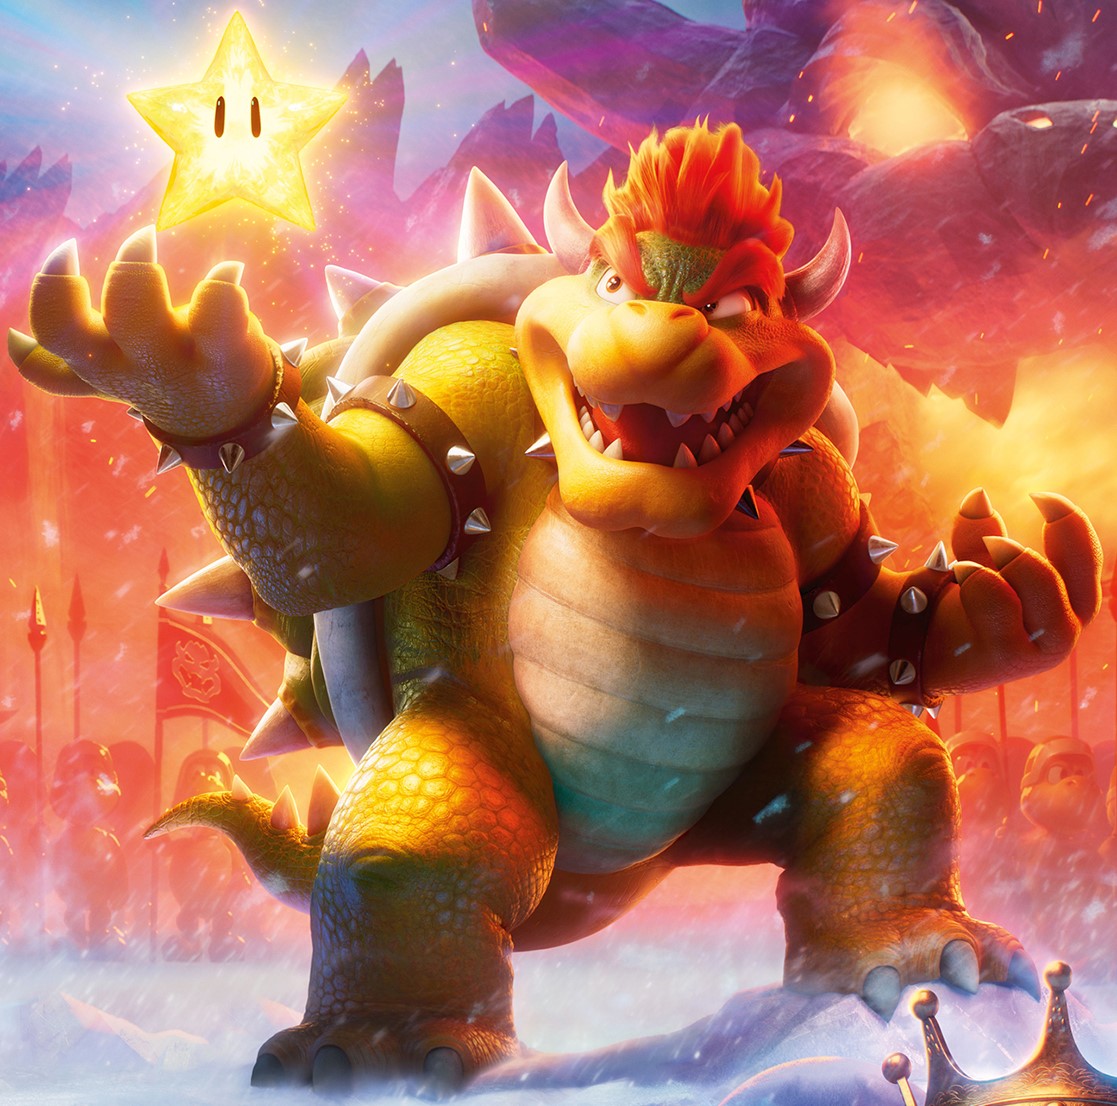 Super Mario Bros: Is There A World Where Bowser Is The Perfect Boyfriend?